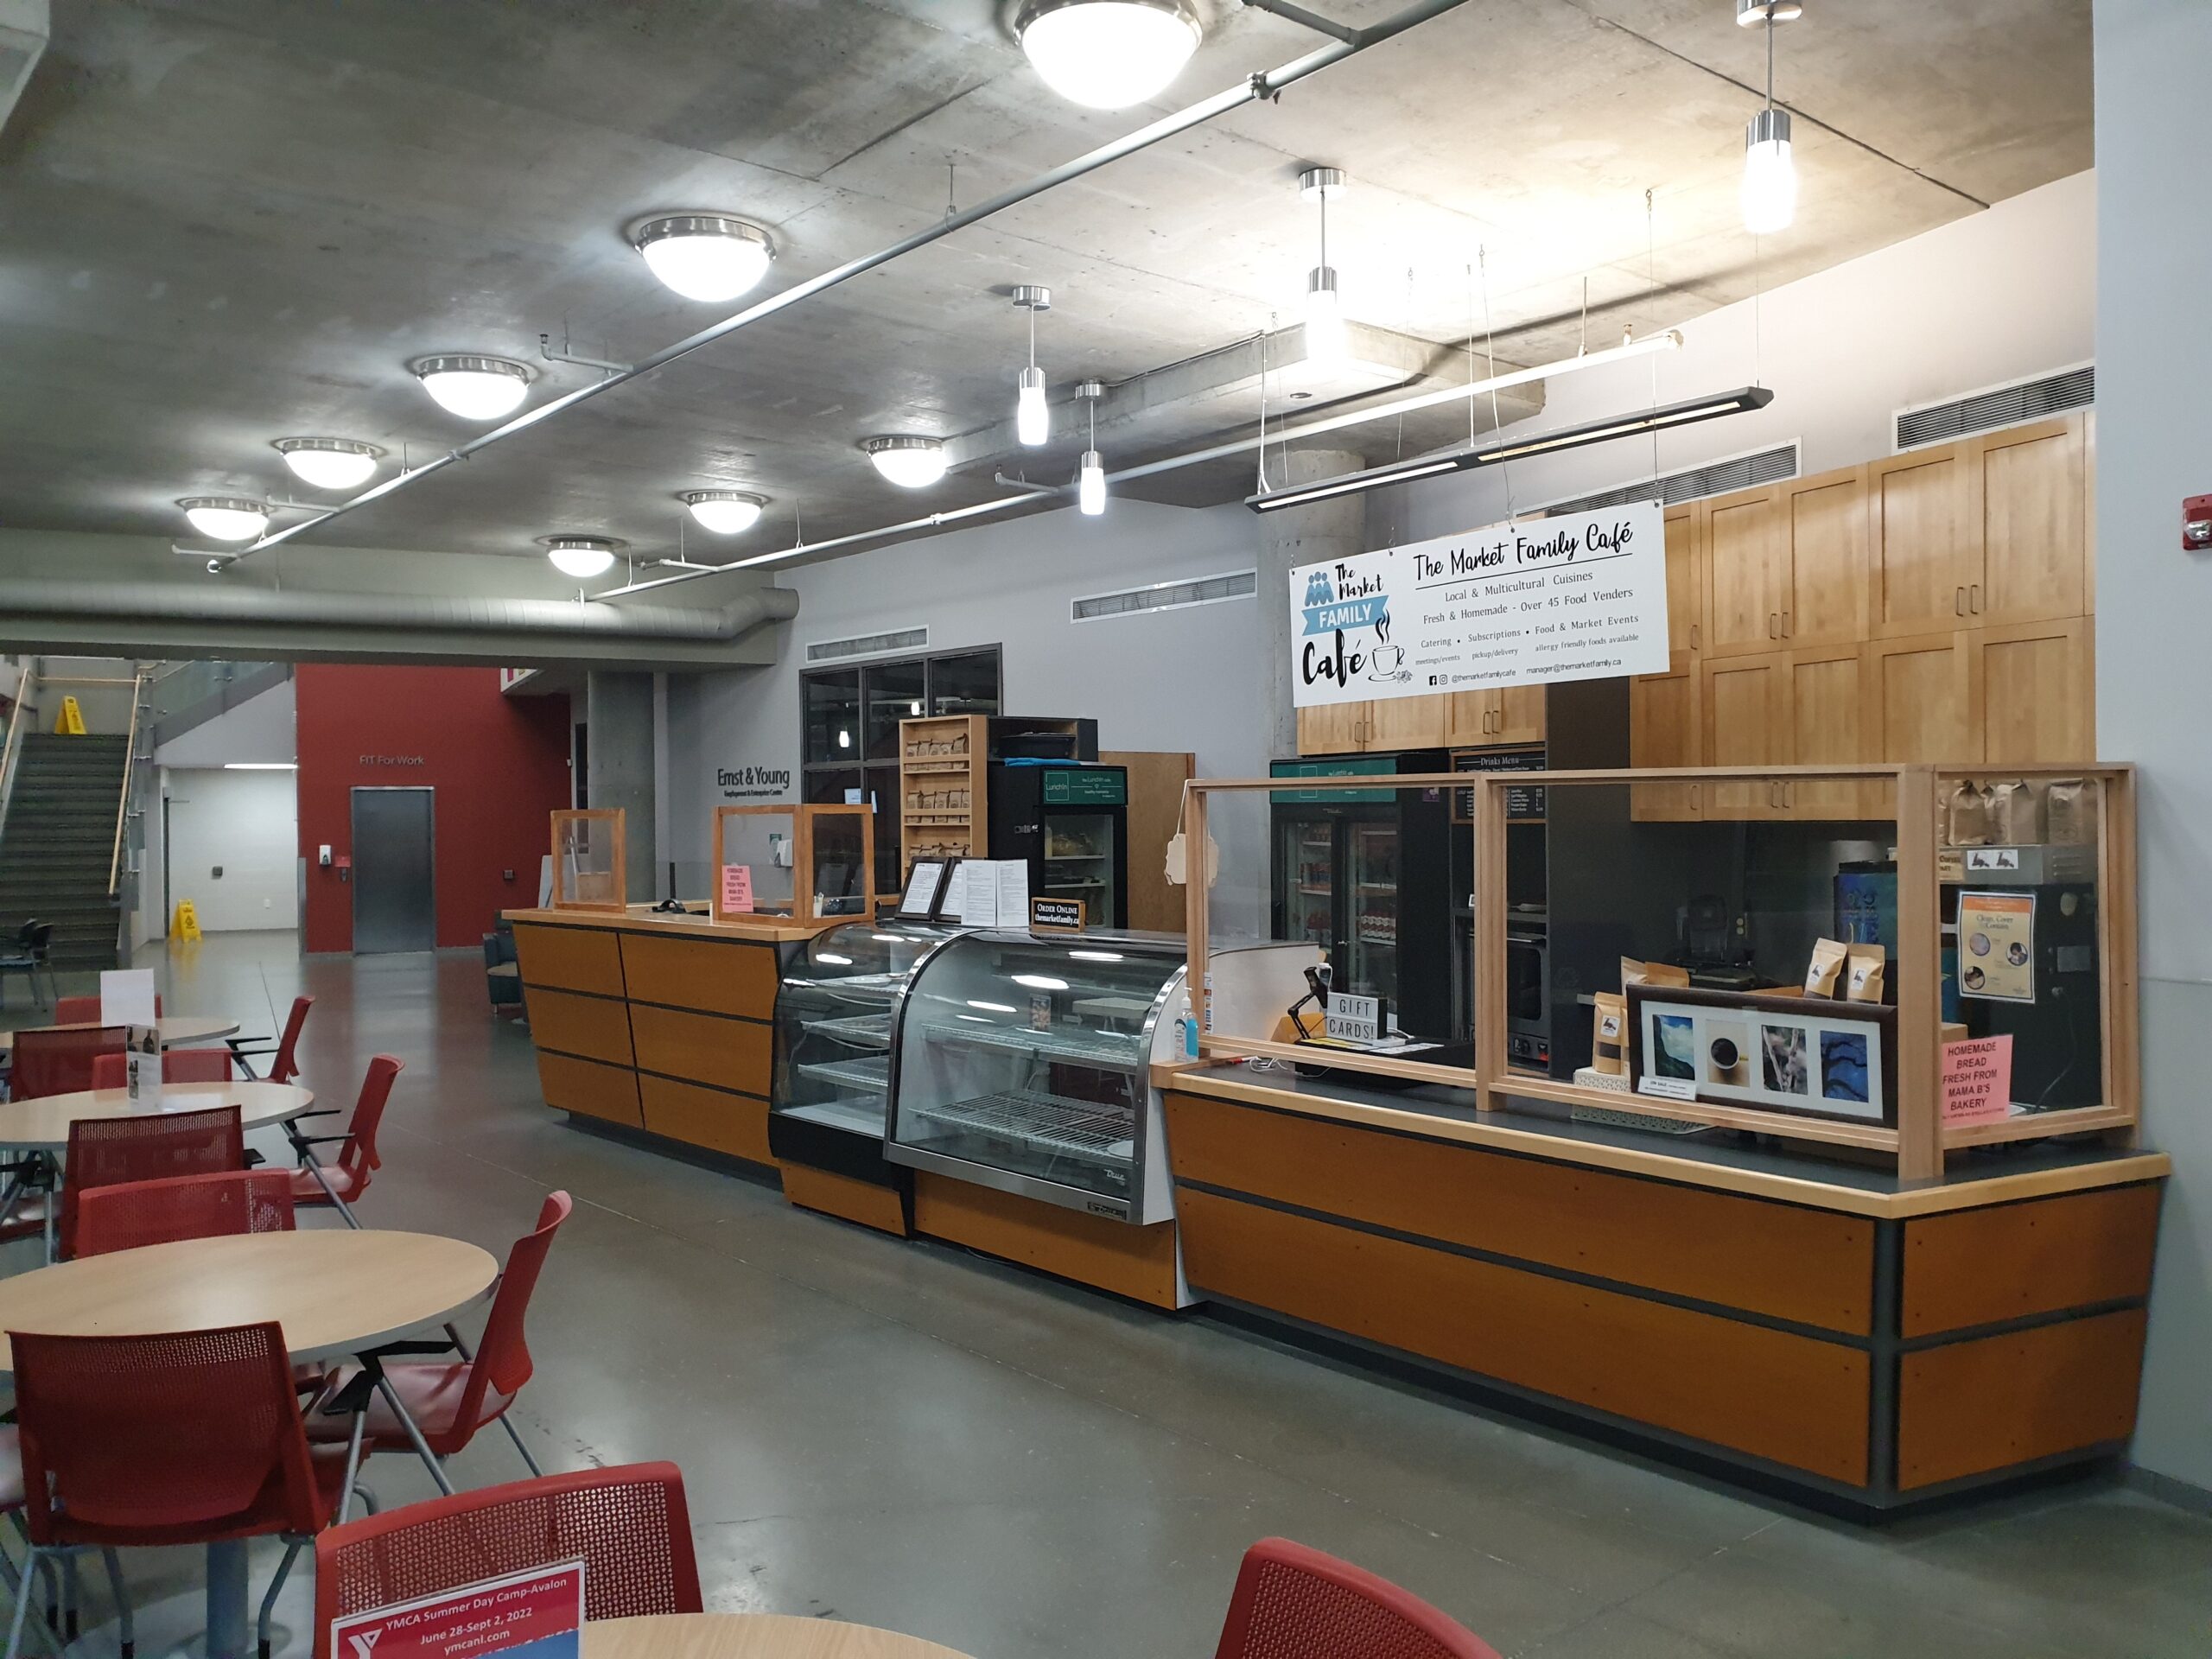 The Market Family Cafe area at the YMCA